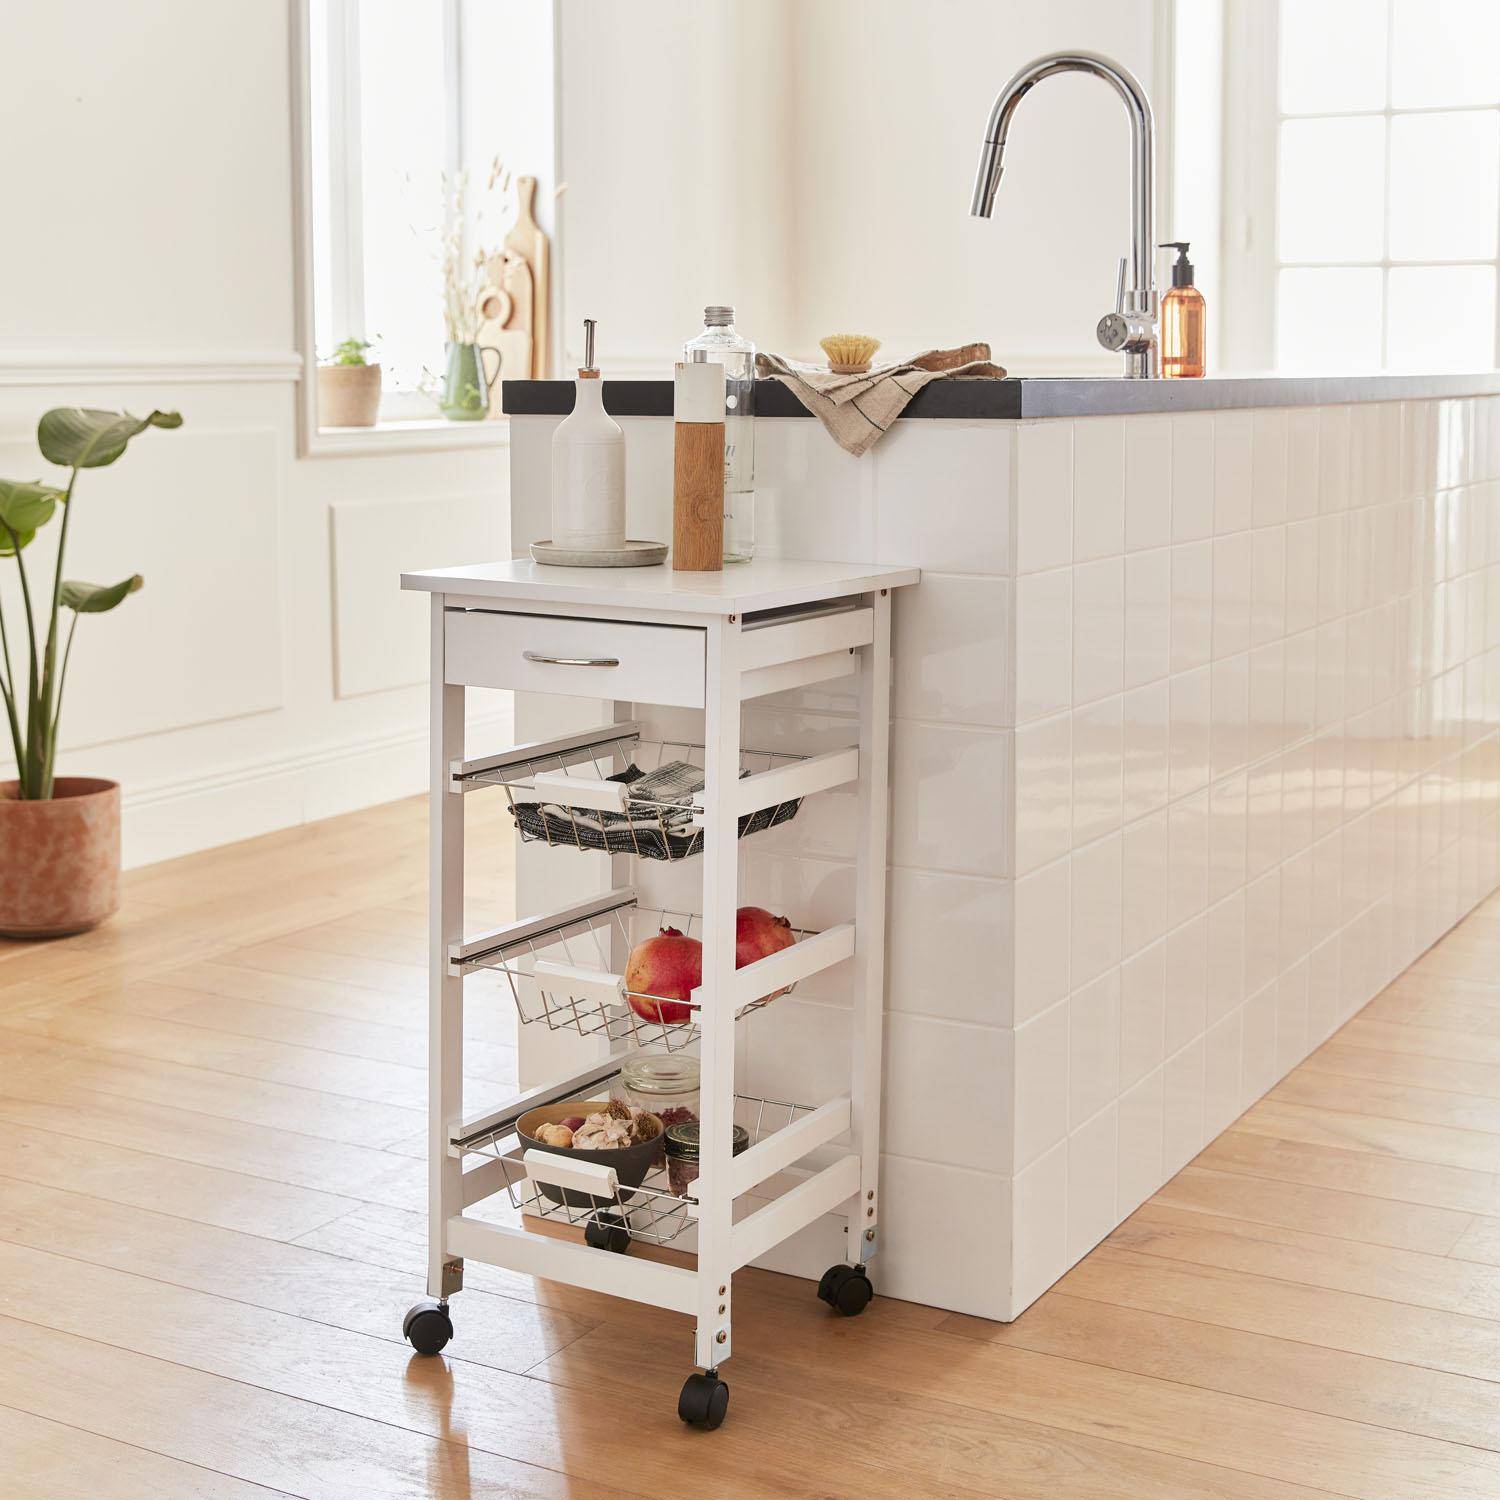 Wood-Effect Kitchen Cart with Wheels - 37x37cm, white Photo1